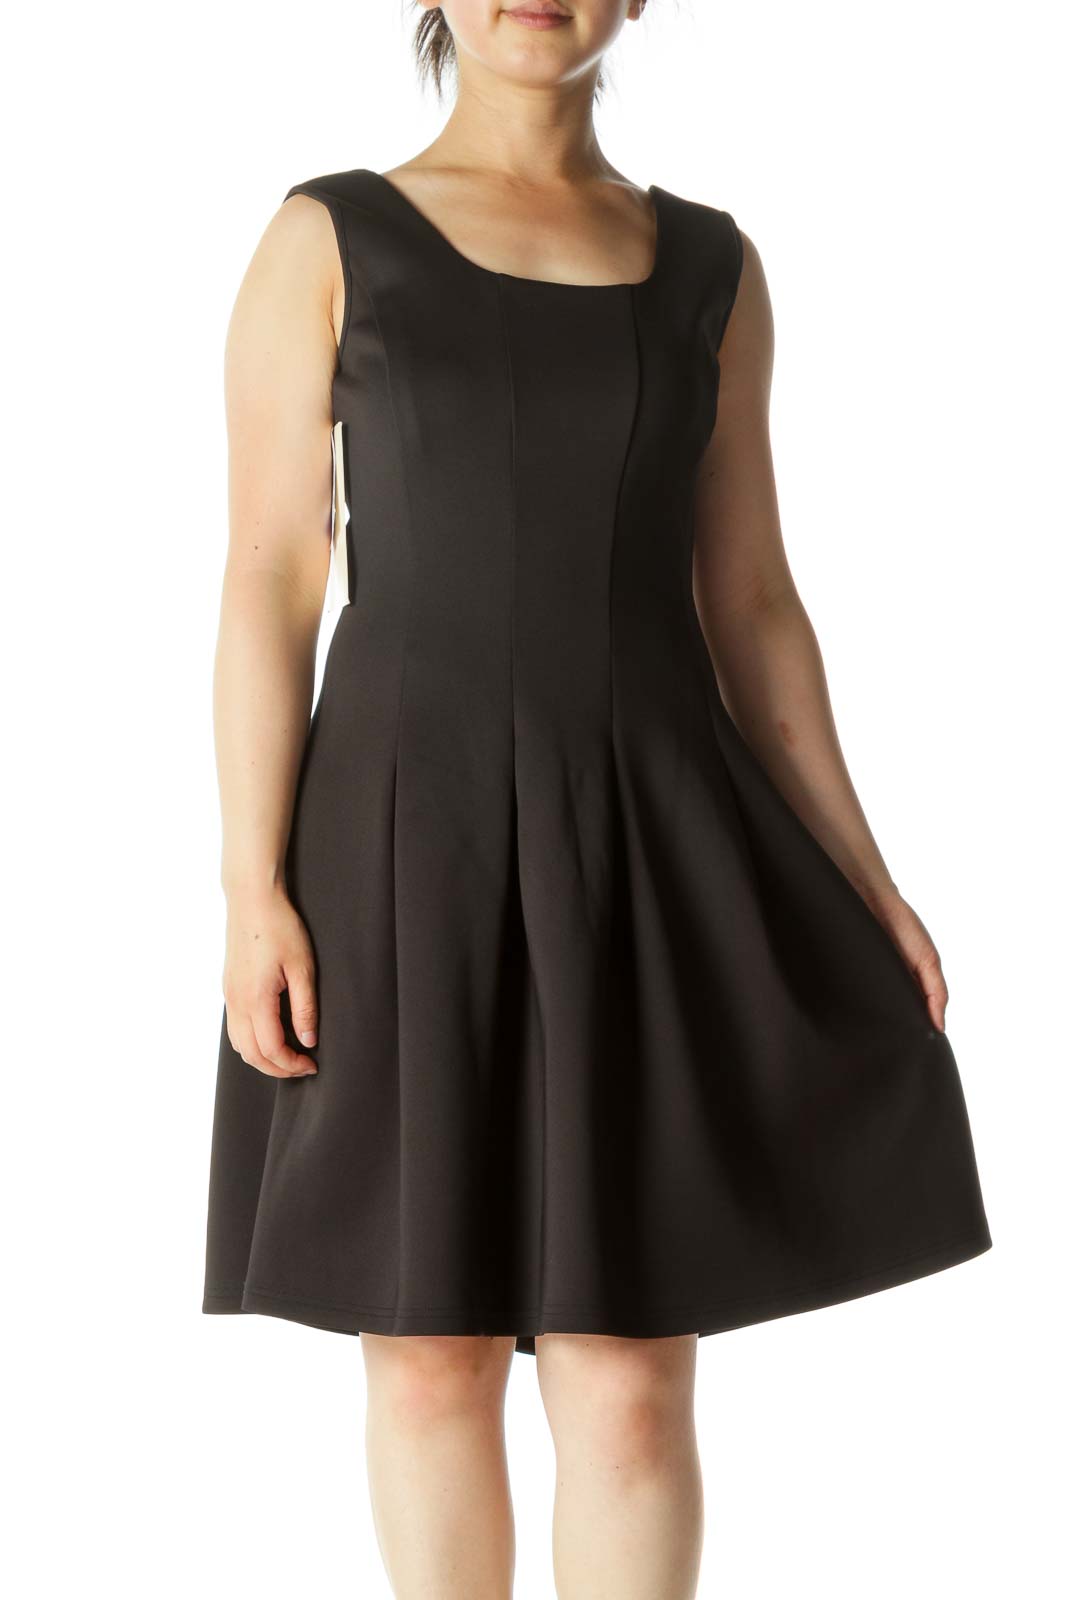 Black A-Line Pleated Work Dress Front